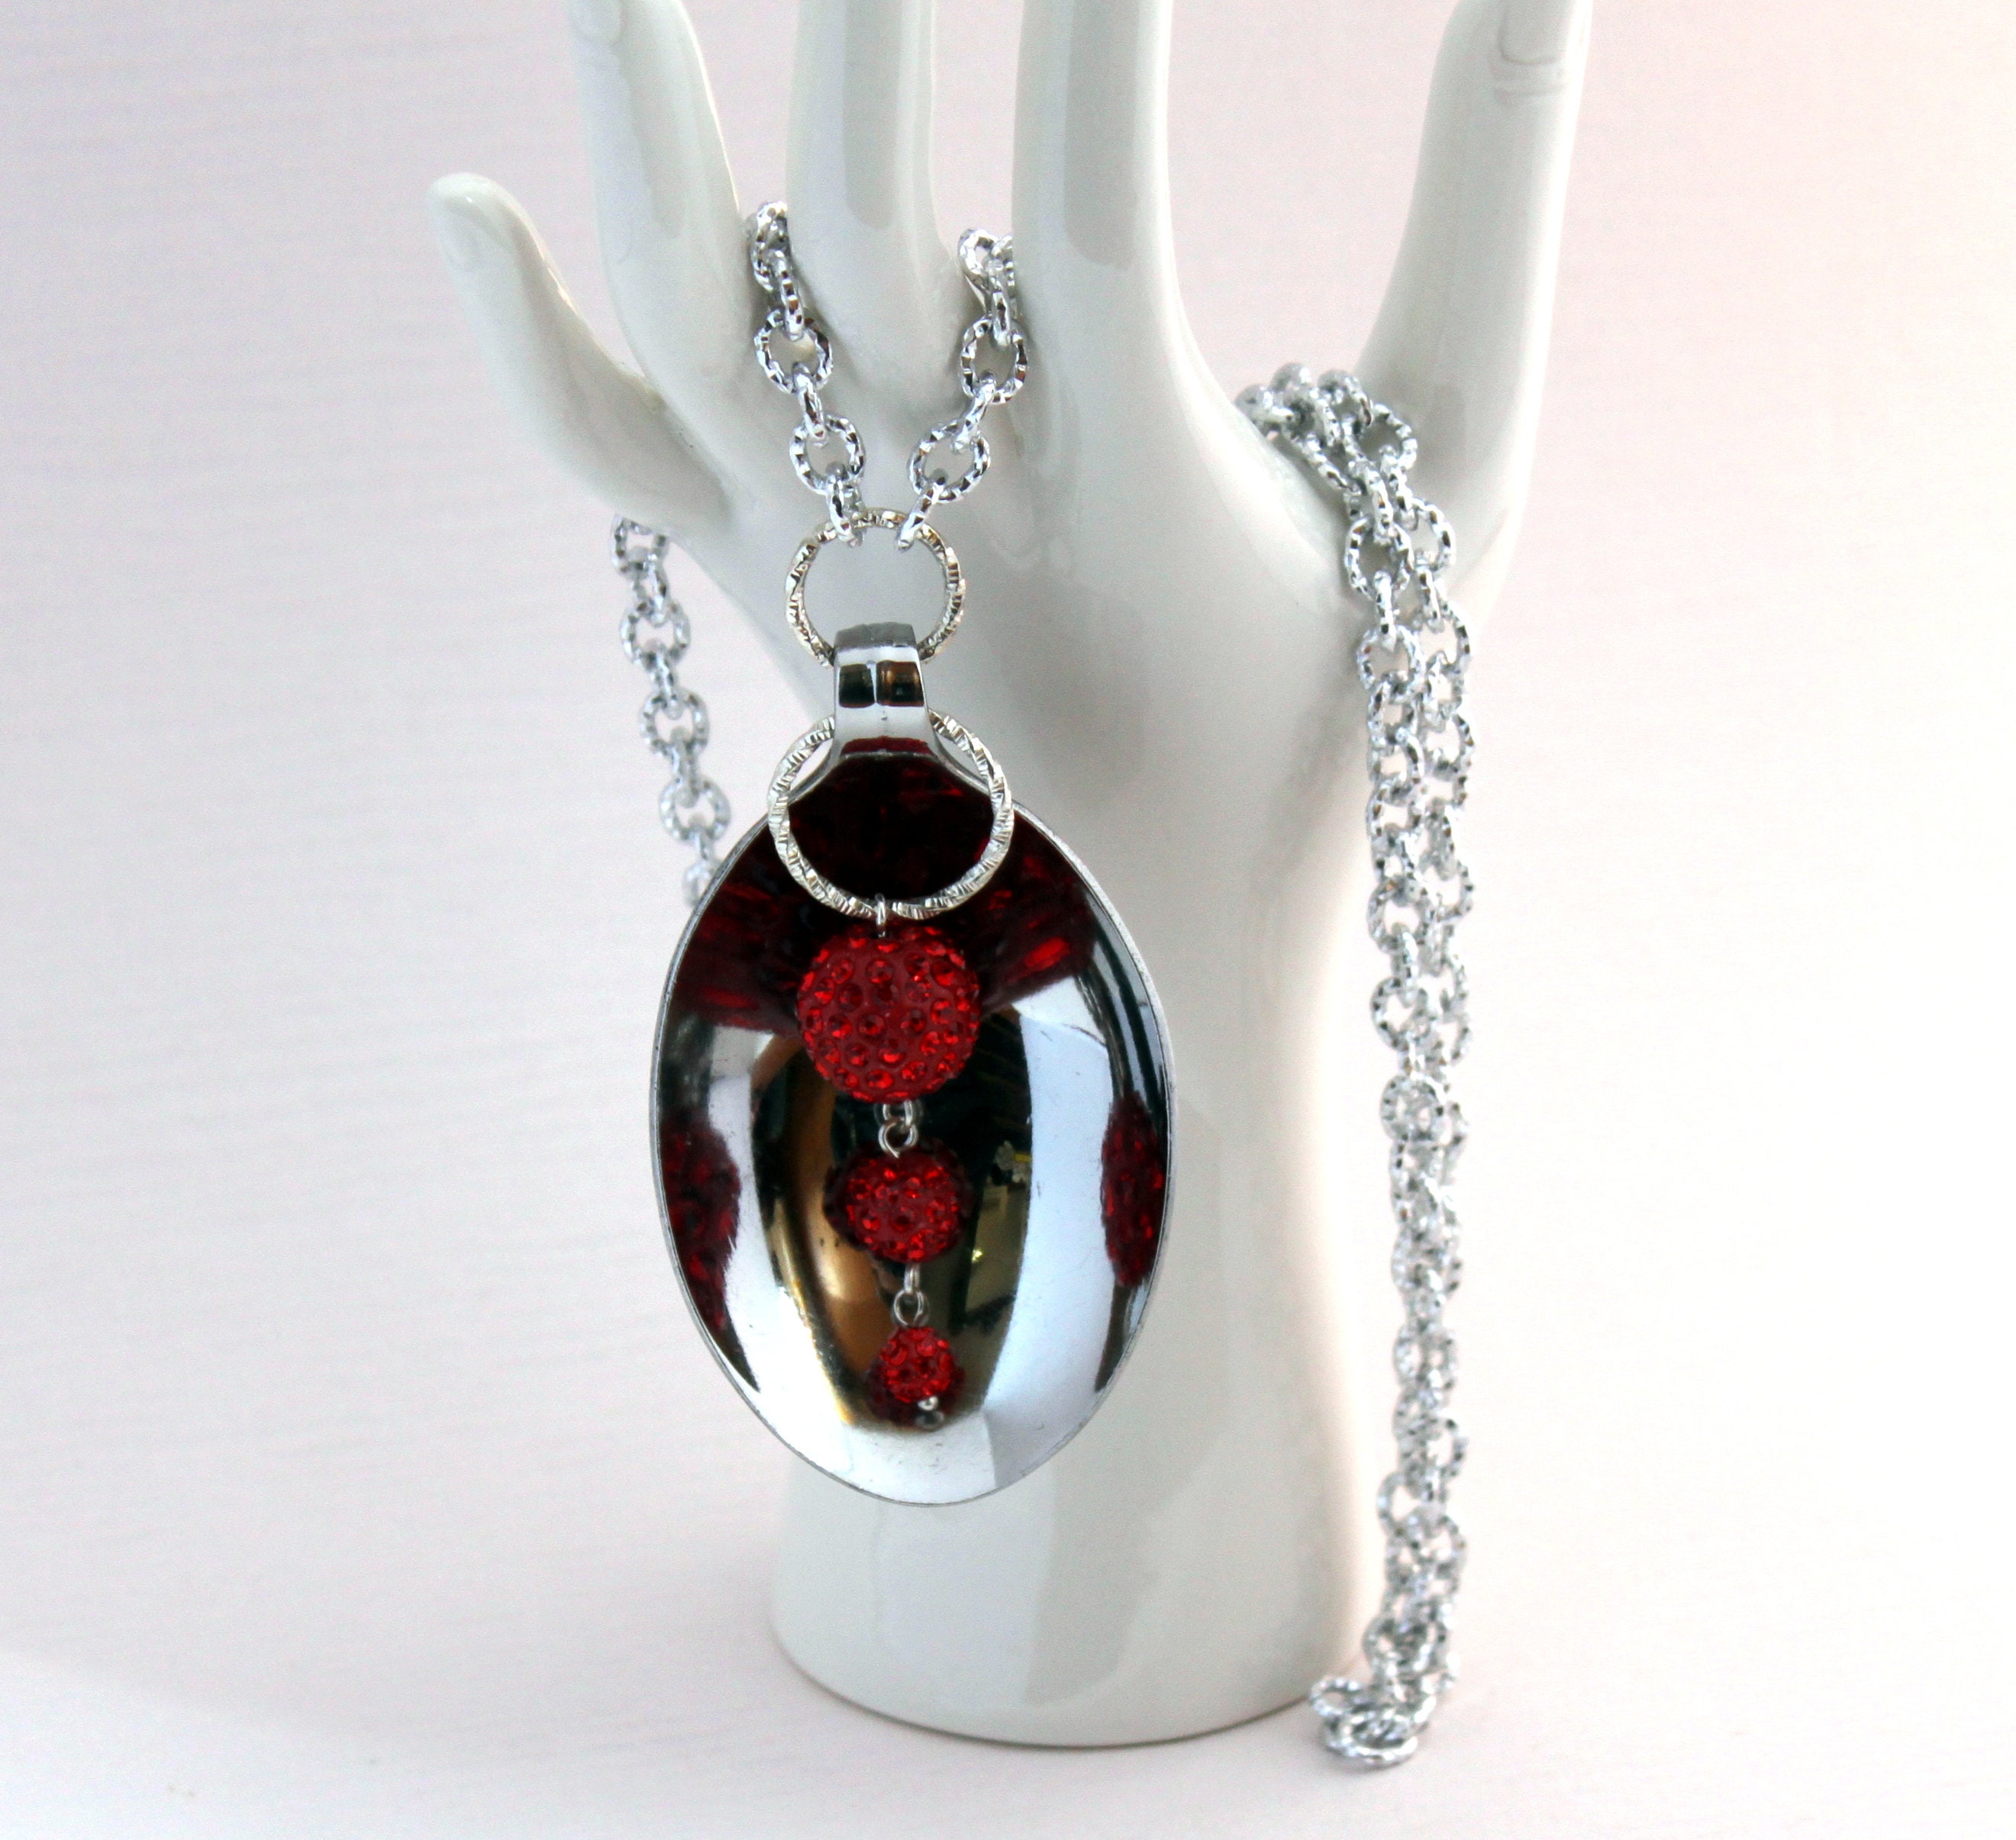 Spoonful of Red Love Sparkles Silverware Jewelry Pendant - Etsy